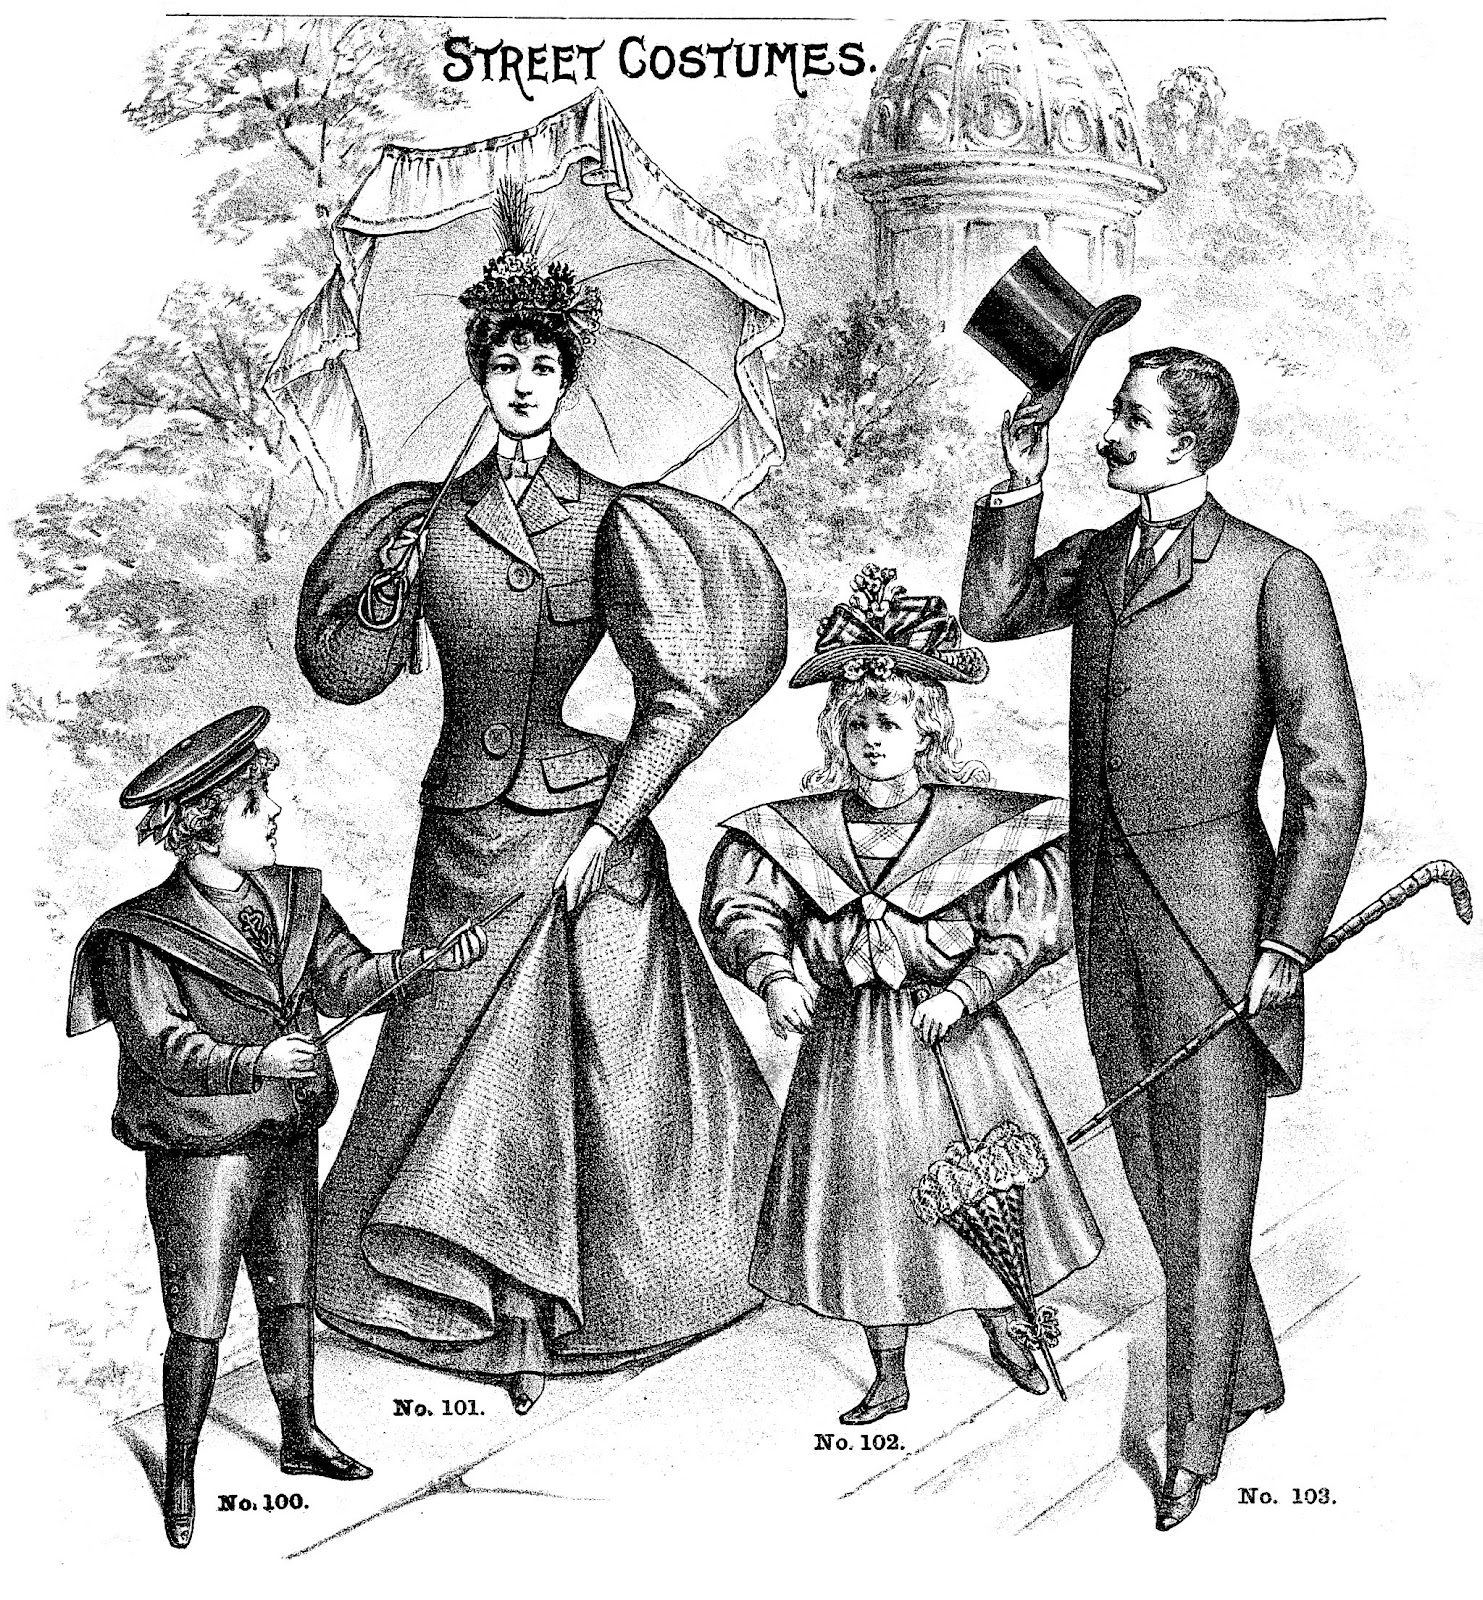 Father S Day Clip Art   Victorian Family   Dad   The Graphics Fairy